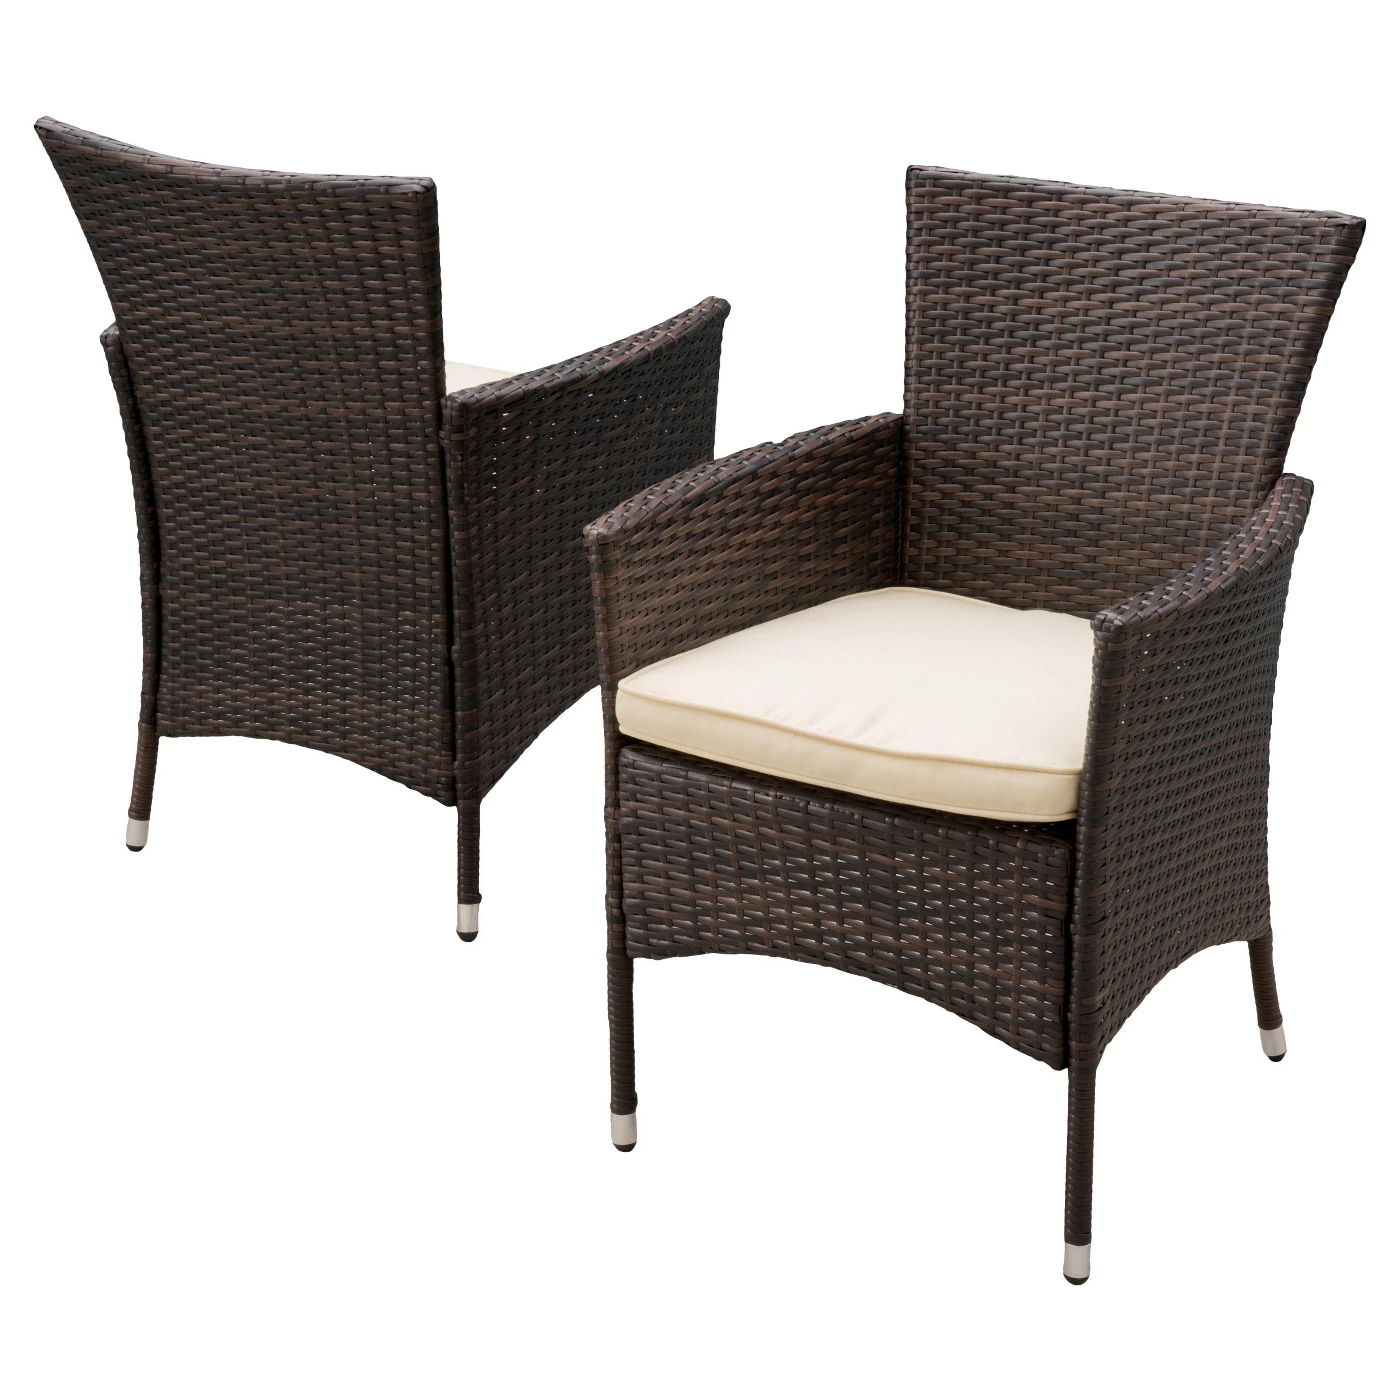 Malta Set of 2 Wicker Patio Dining Chair with Cushions -<br> Christopher Knight Home - image 1 of 4